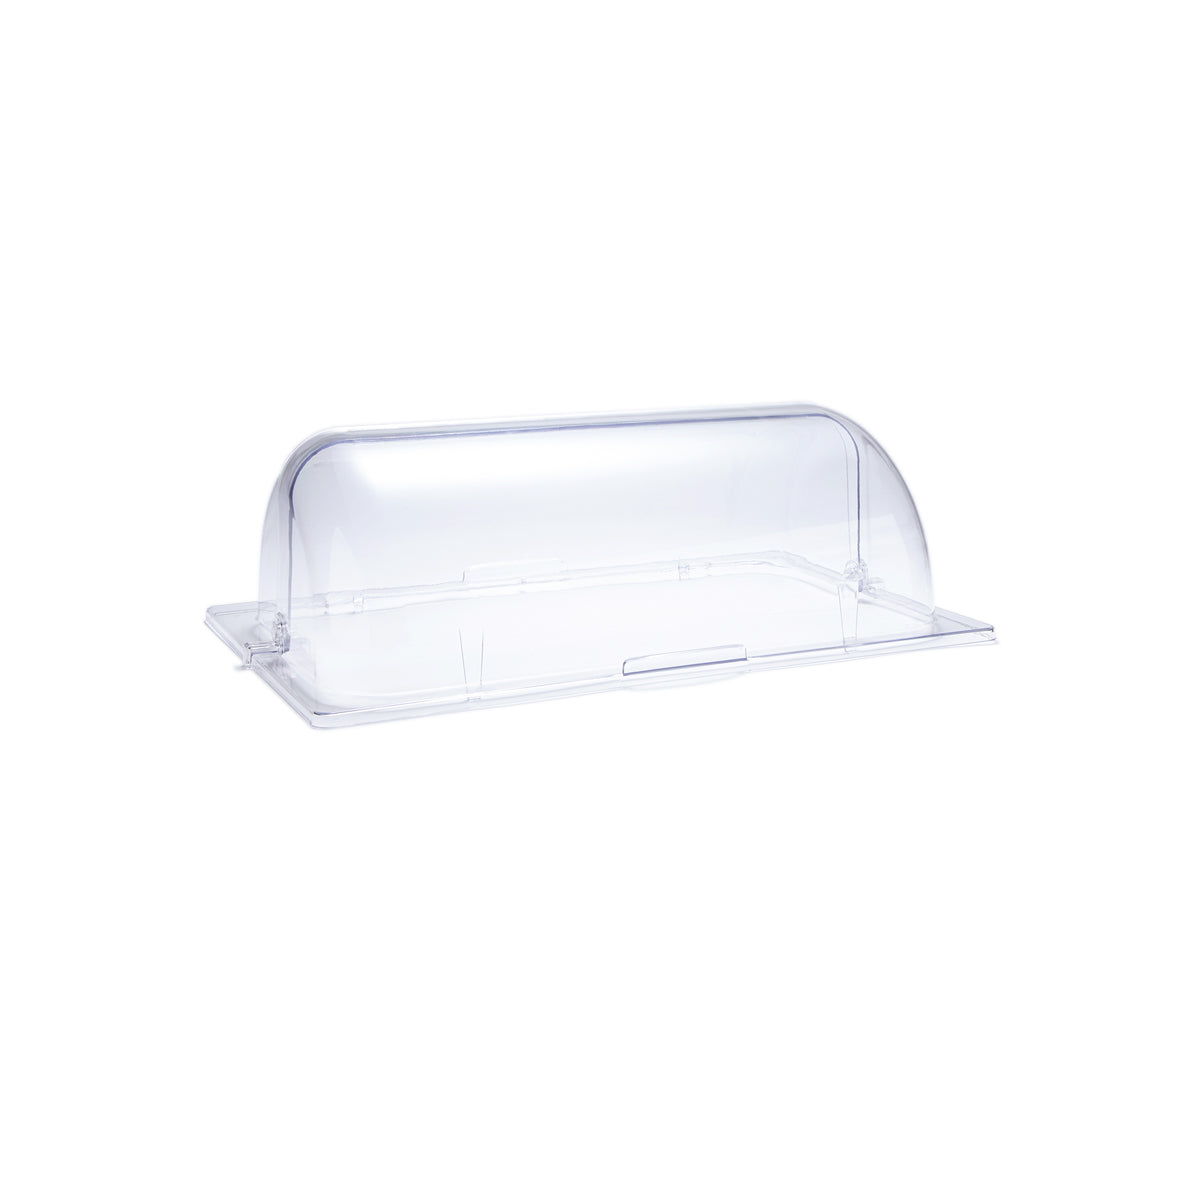 Food covers are essential to good temperature and hygiene control.  GN Gastronorm sizing roll-top design food cover enhances both side opening makes it convenient for for buffet service.  Specifically for Vidacasa® Universal buffetware equipment.  Made with durable clear plastics.  